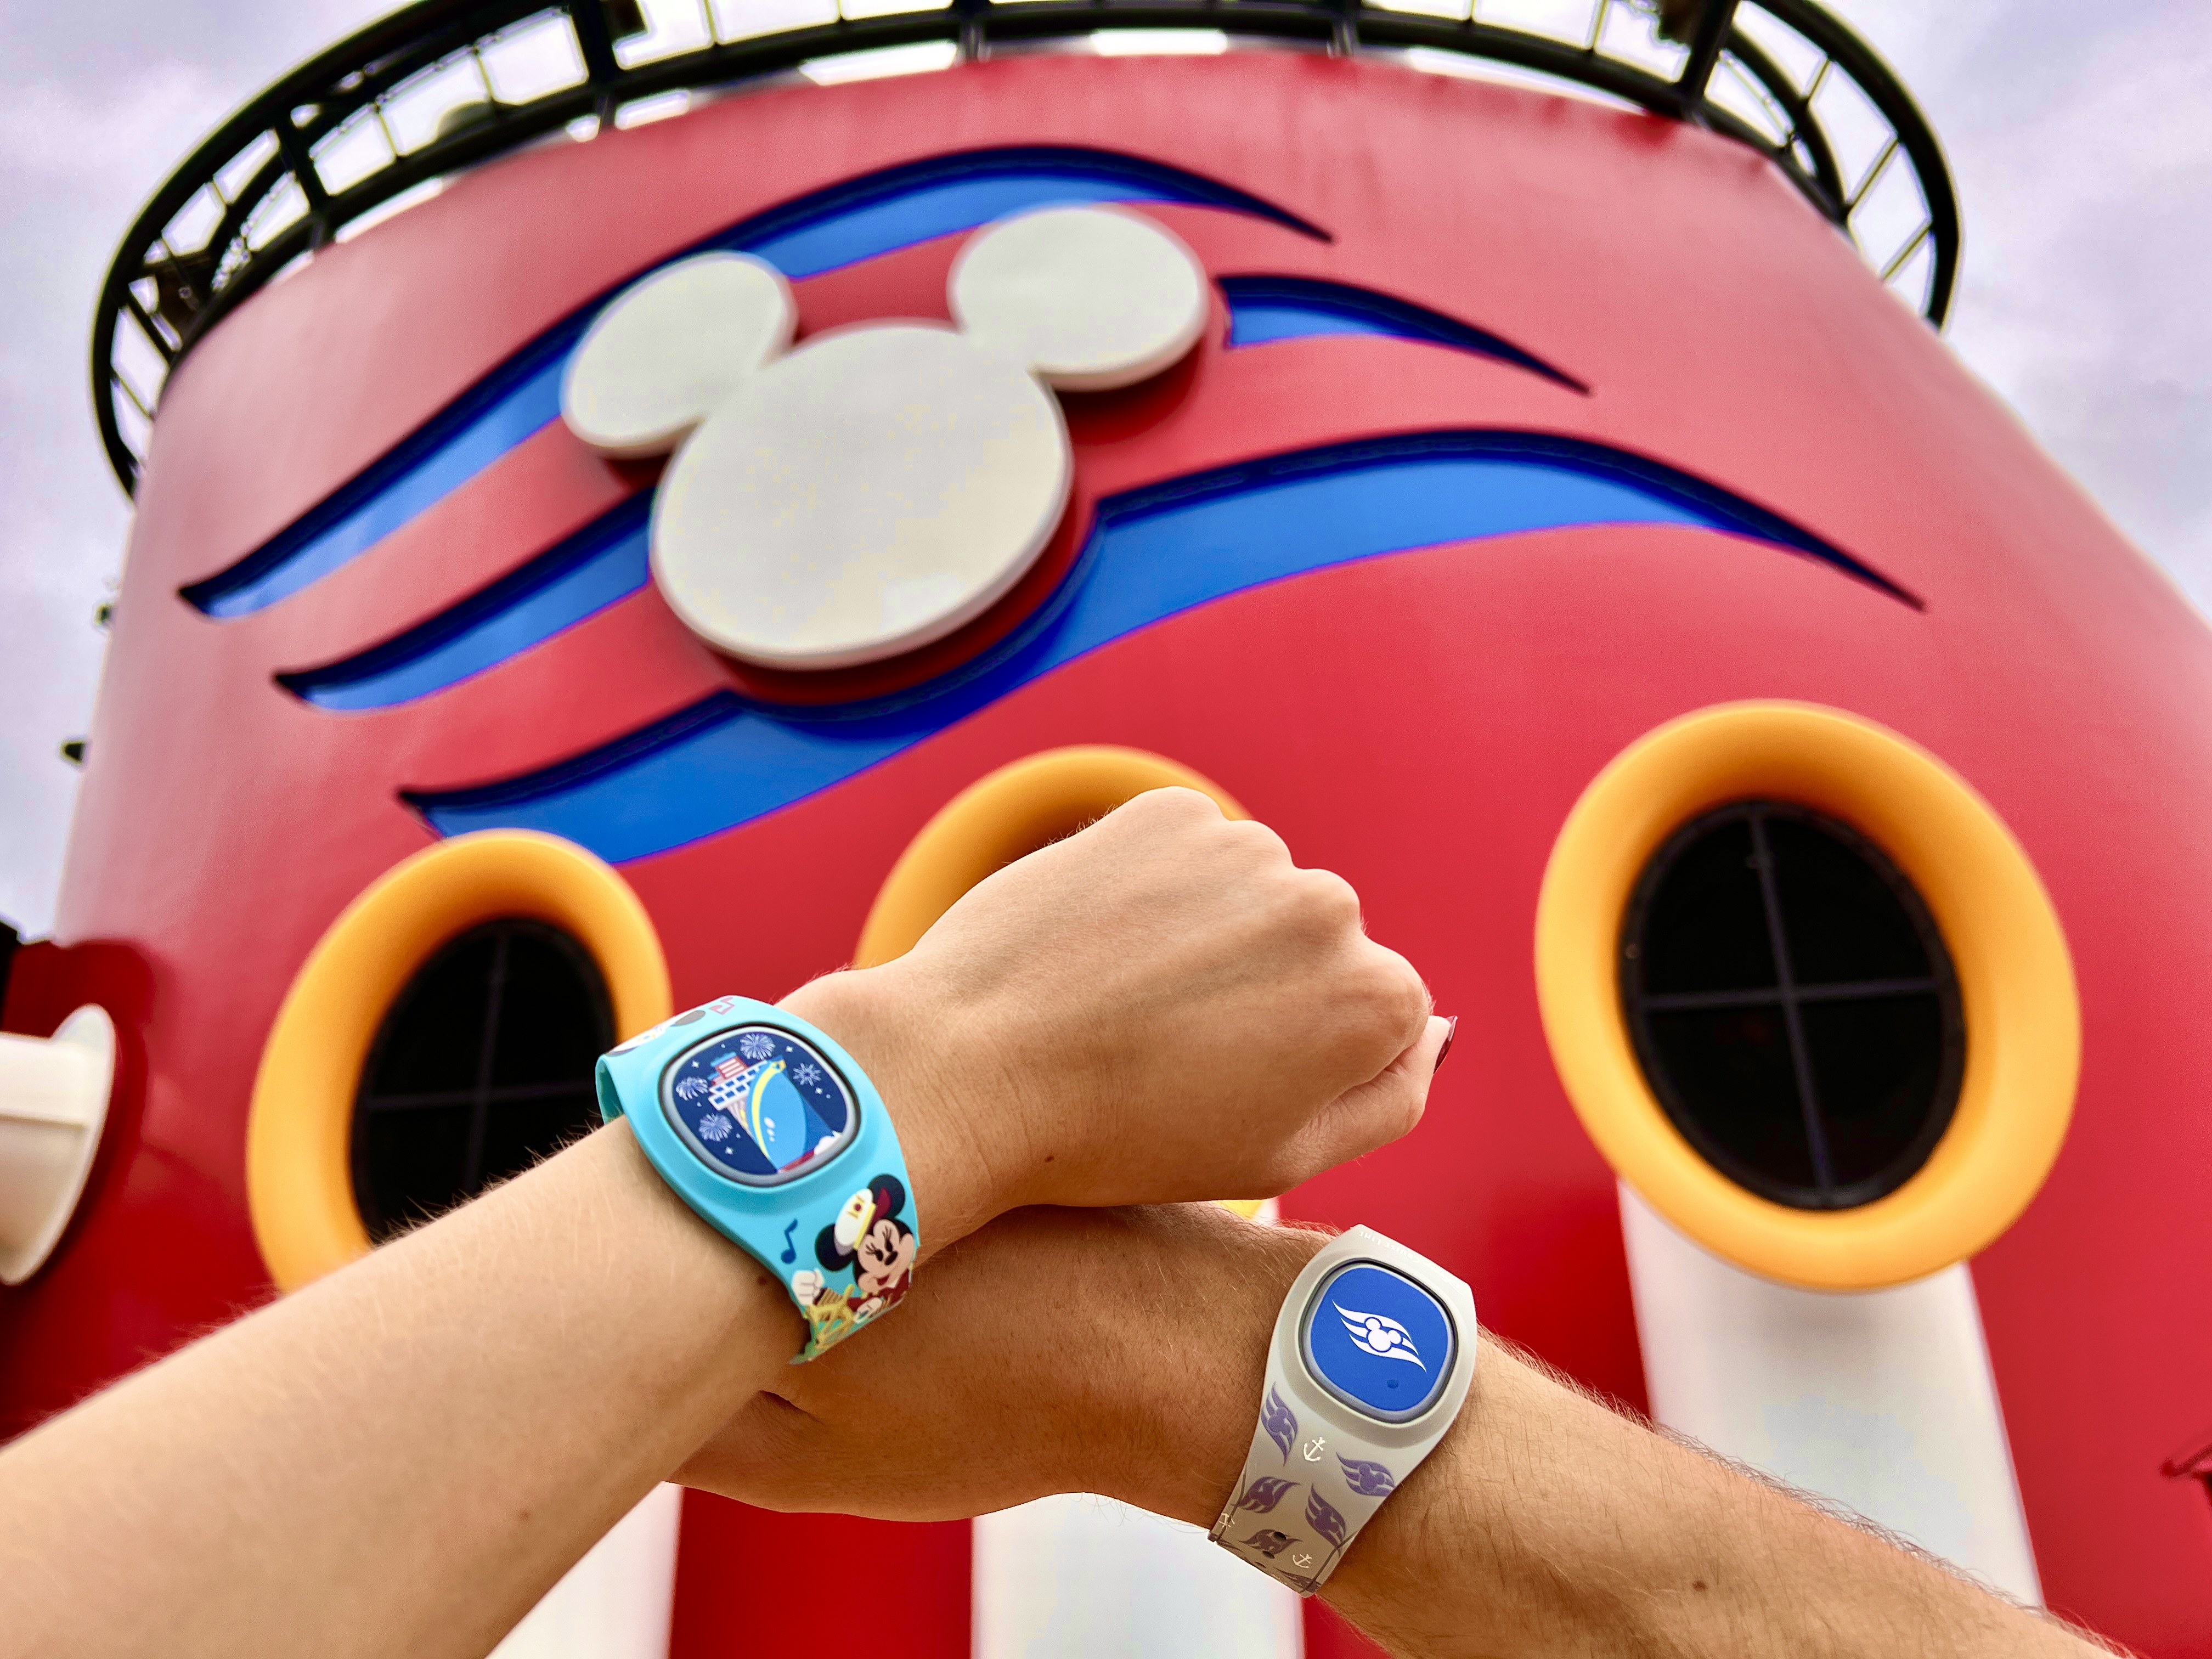 MagicBand+ debuts at Disney World: What you should know